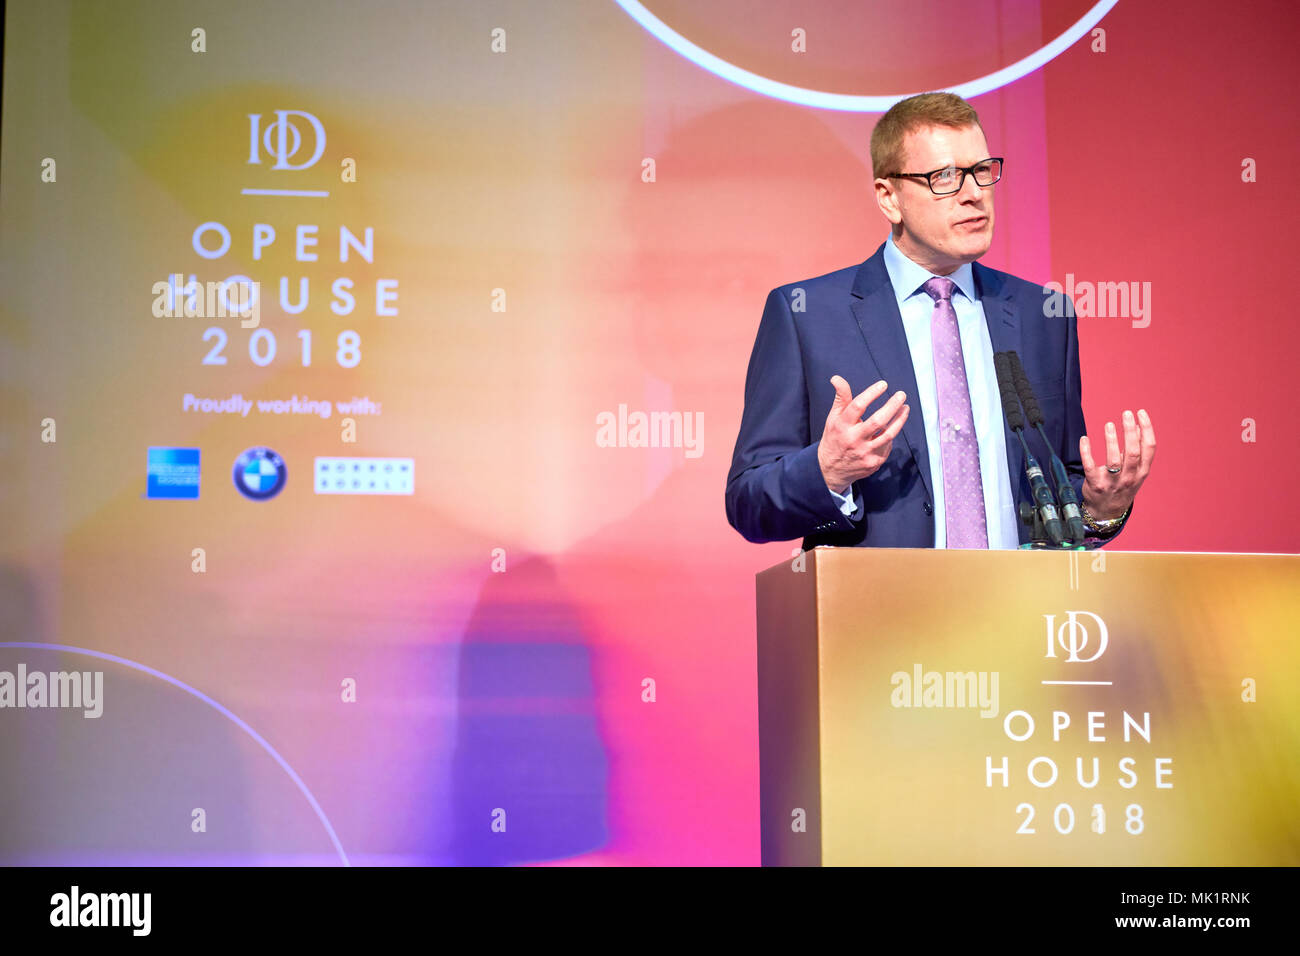 Director General STEPHEN MARTIN delivers a speech at the Institute of Directors Open House 2018 event held in the IoD's Pall Mall building Stock Photo